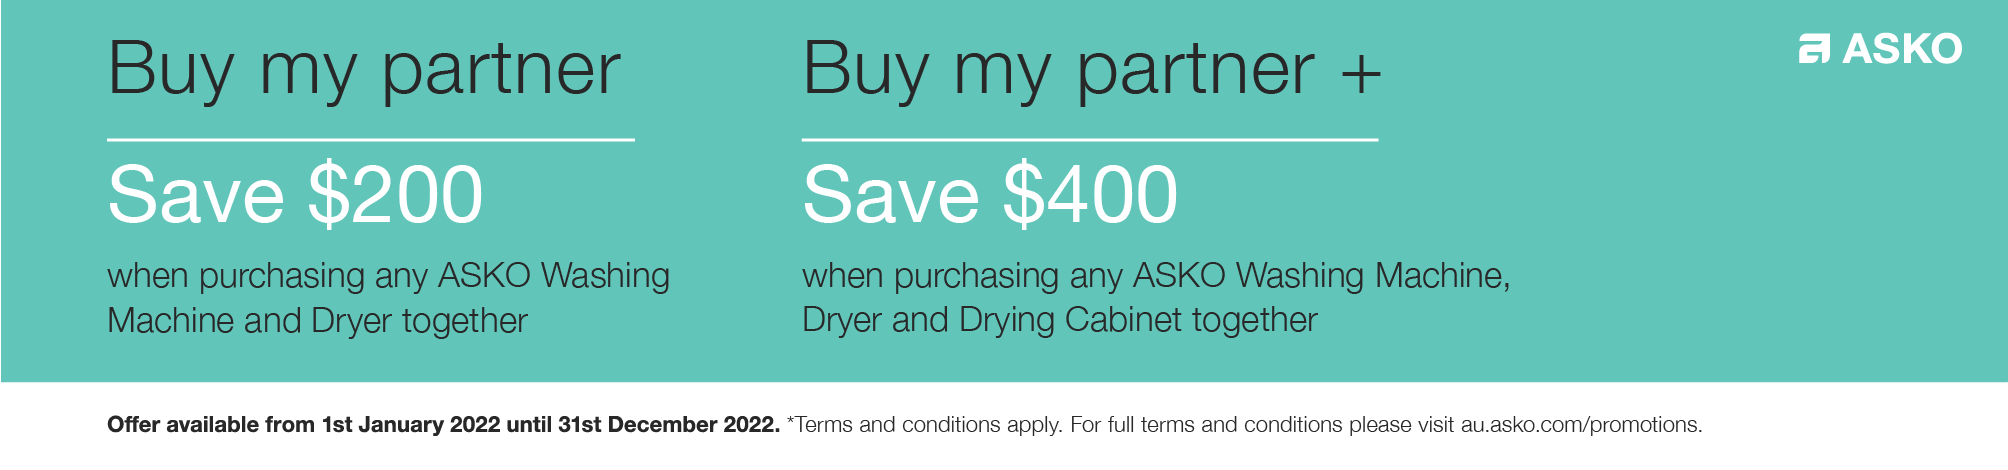 Buy Any Asko Washing Machine In Conjunction With An Asko Dryer And Save Up To $400